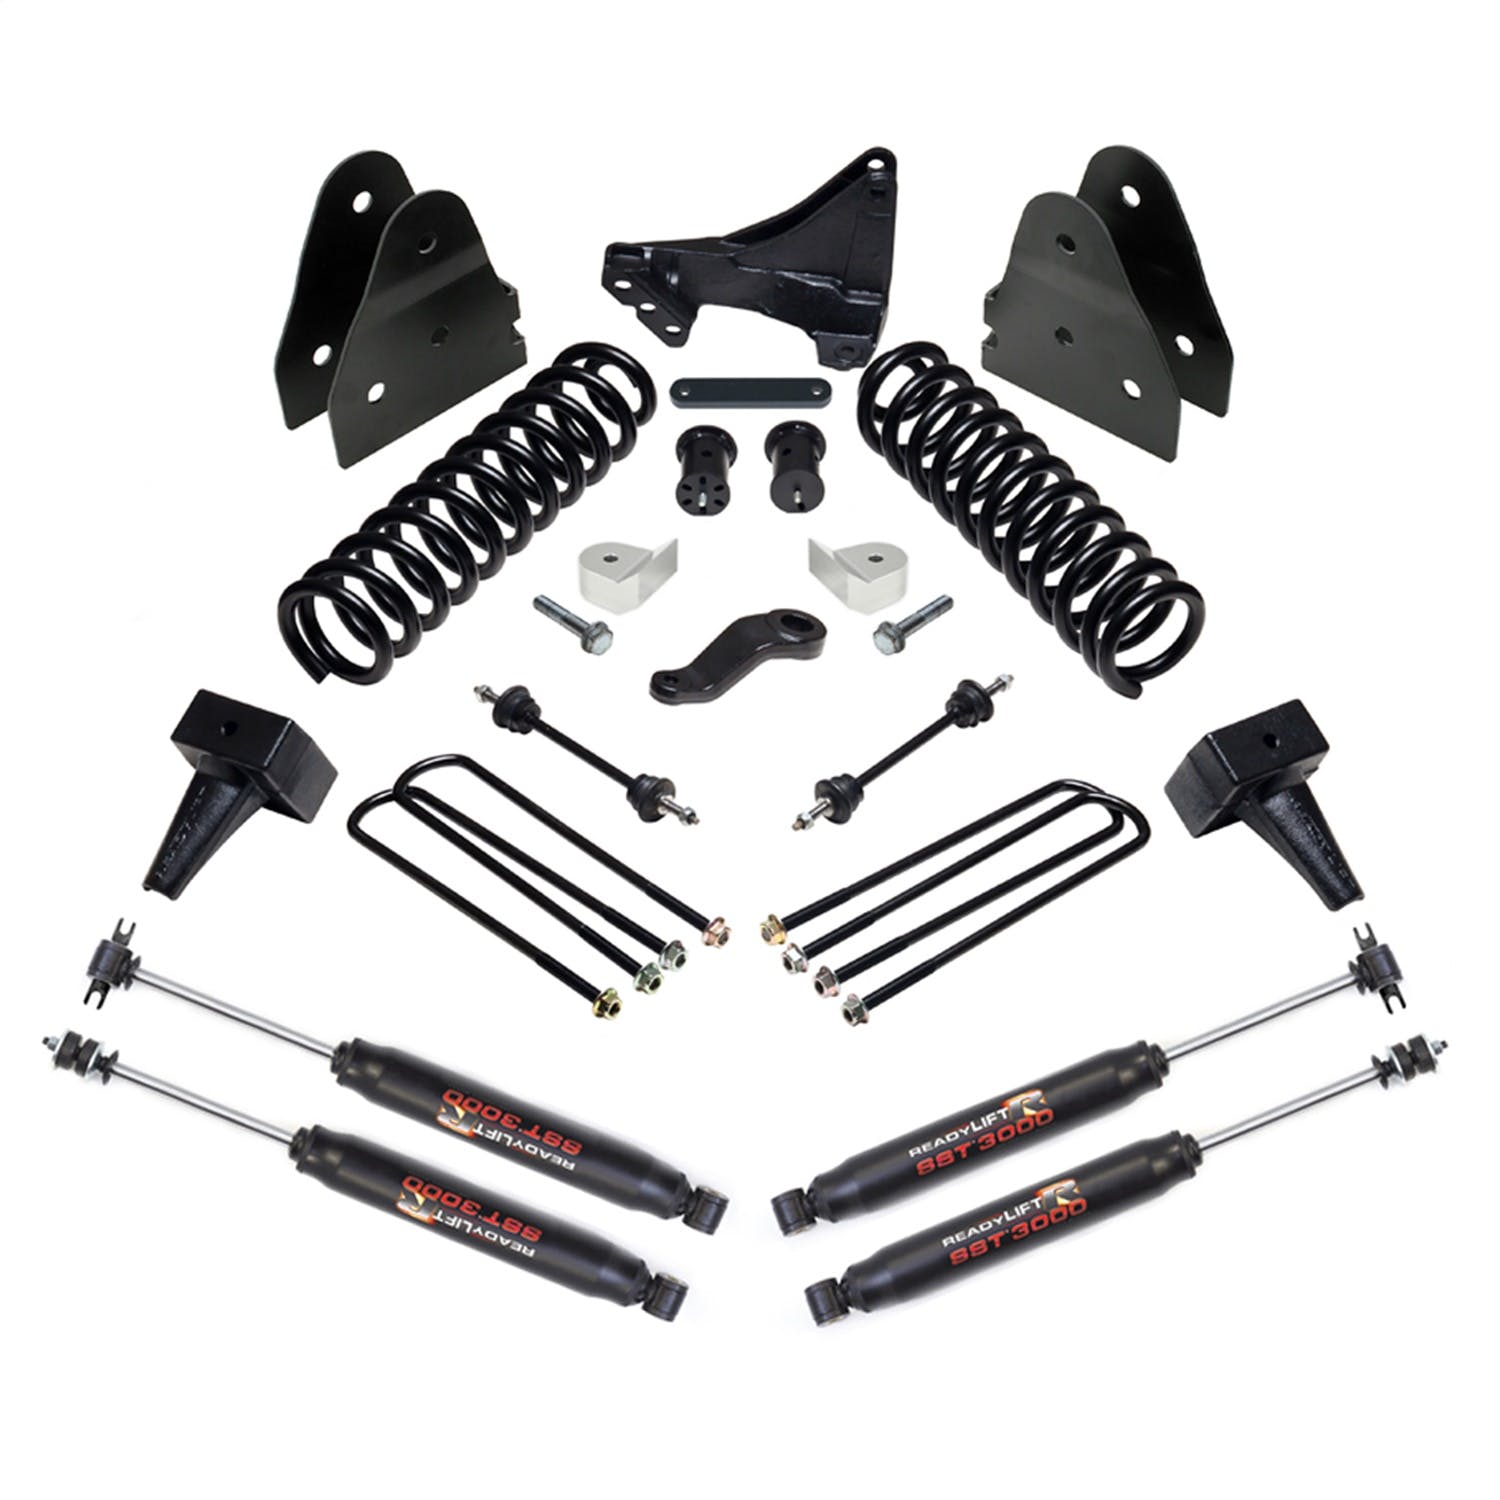 ReadyLIFT 49-2768 6.5" Suspension Lift Kit with SST3000 Shocks - 2 Piece Drive Shaft